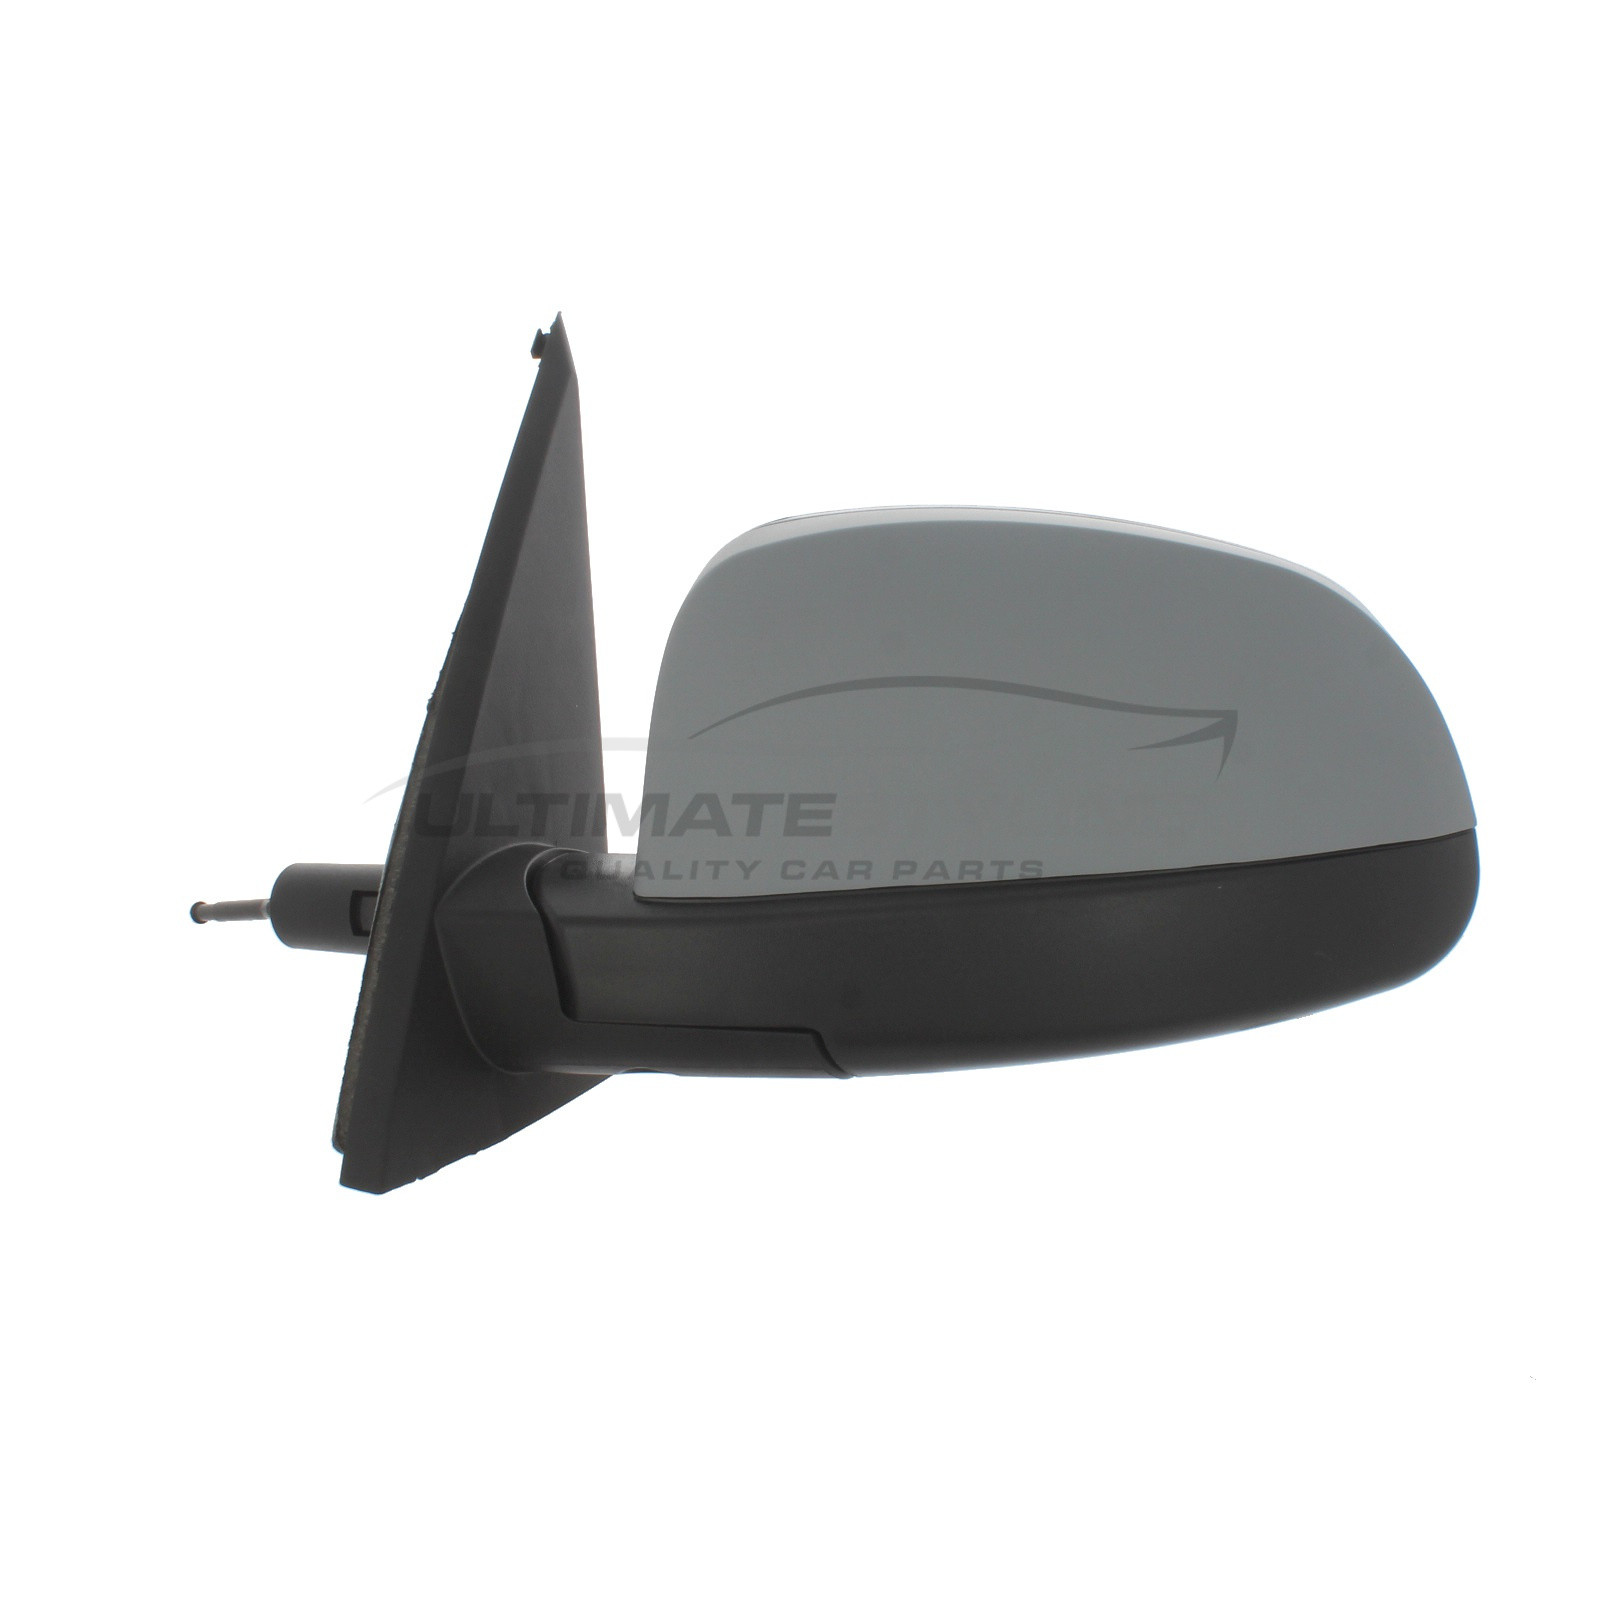 Vauxhall Meriva Wing Mirror / Door Mirror - Passenger Side (LH) - Cable adjustment - Non-Heated Glass - Primed